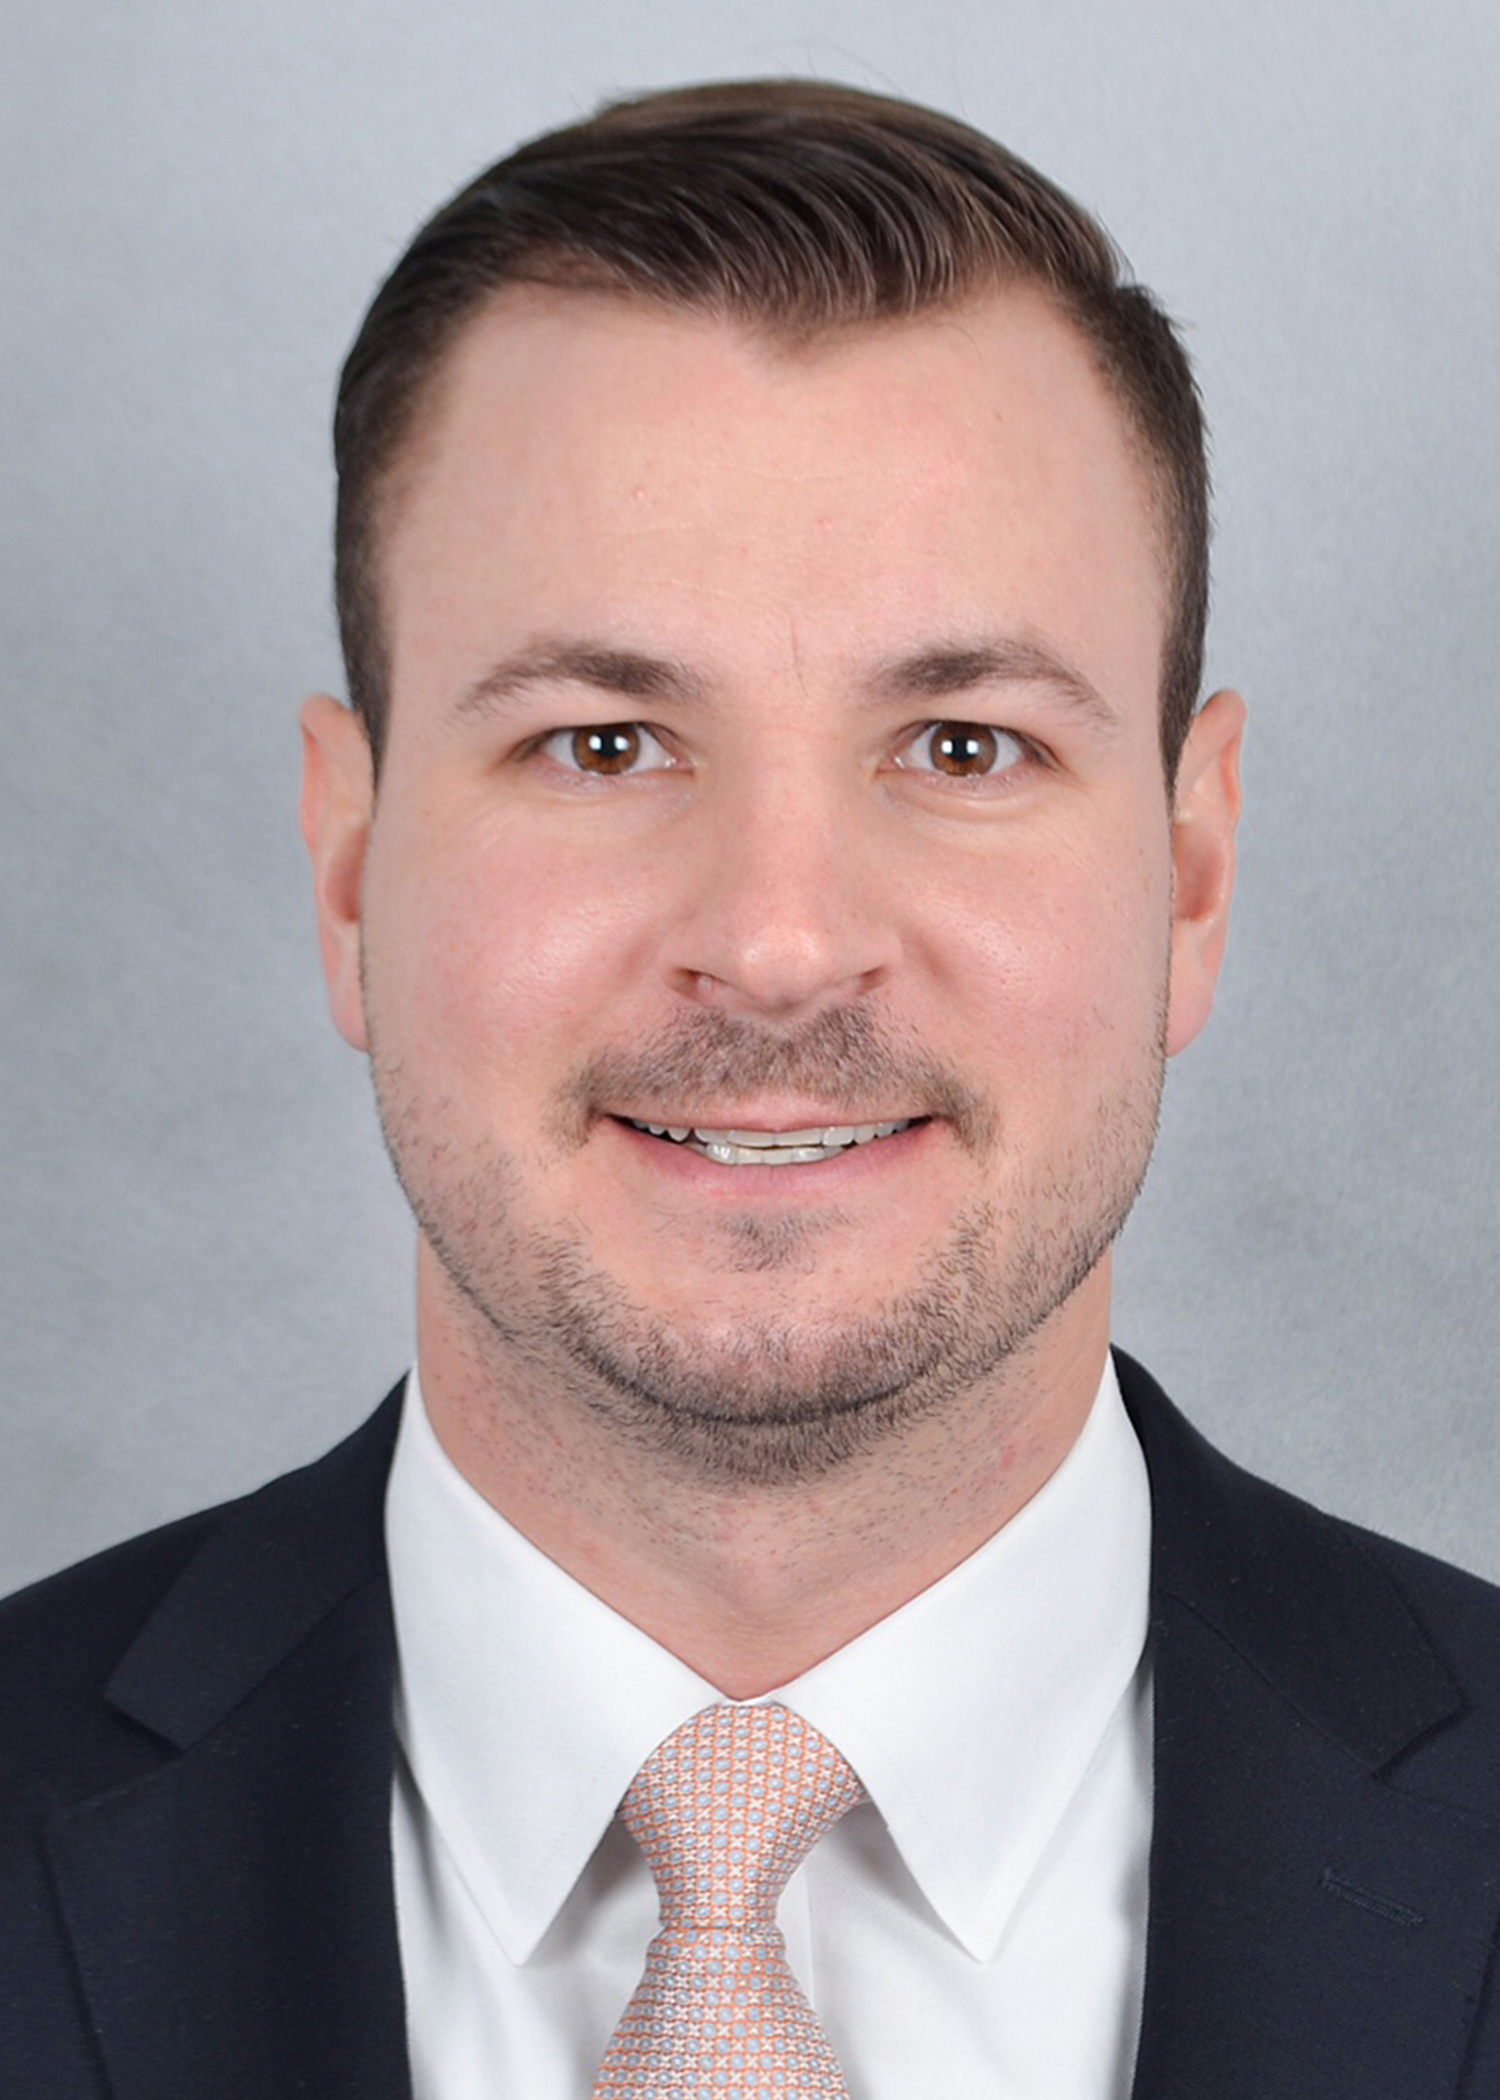 Joshua Stowell was hired by Wilmington Trust as a senior trust sales representative in the Global Capital Markets division.